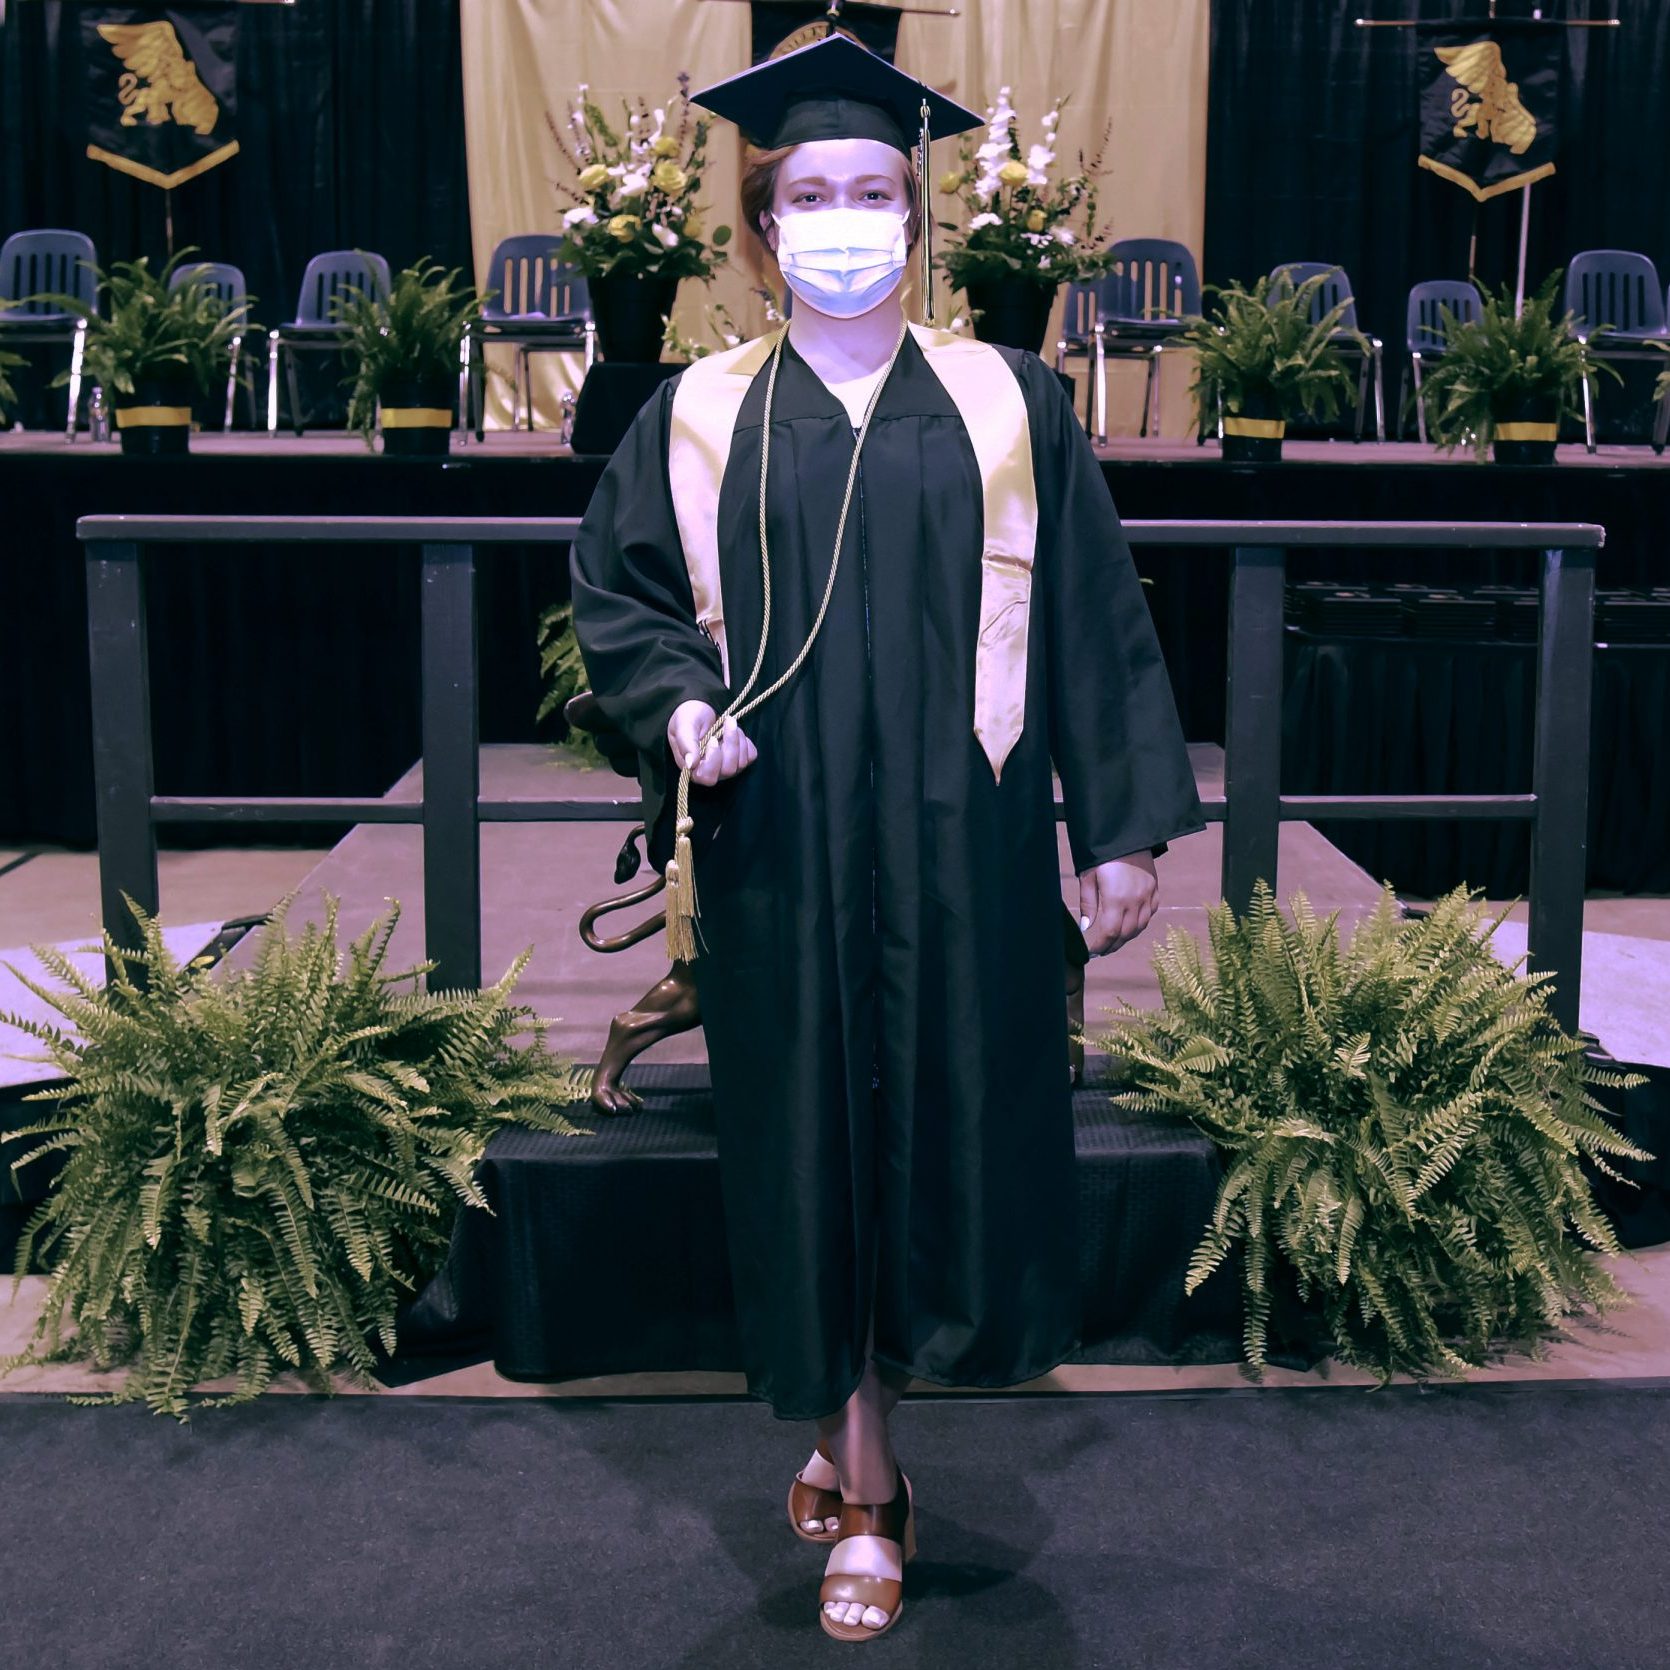 Allison Hildebrand posing for a photo in her cap and gown with commencement stage in background